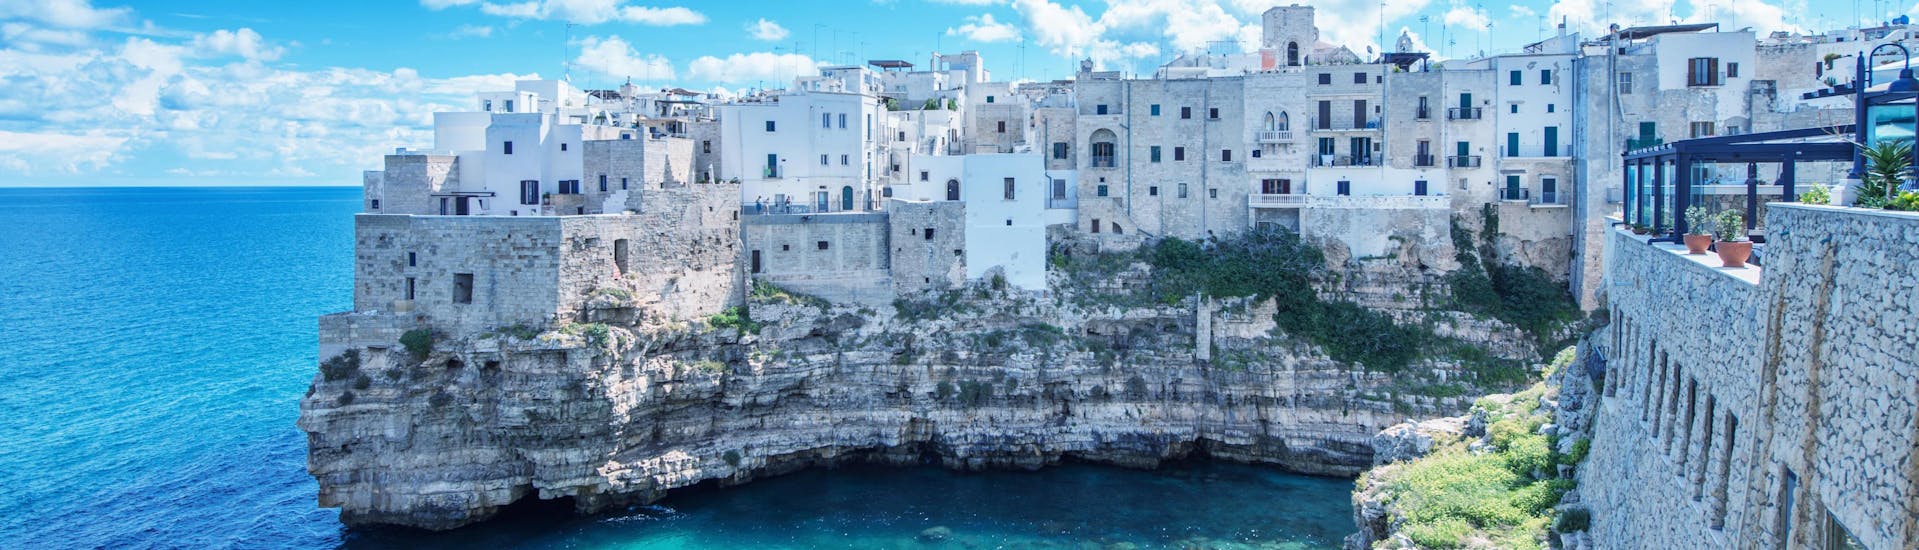 An image of the turquoise waters that visitors get to witness on a boat trip from Polignano a Mare.